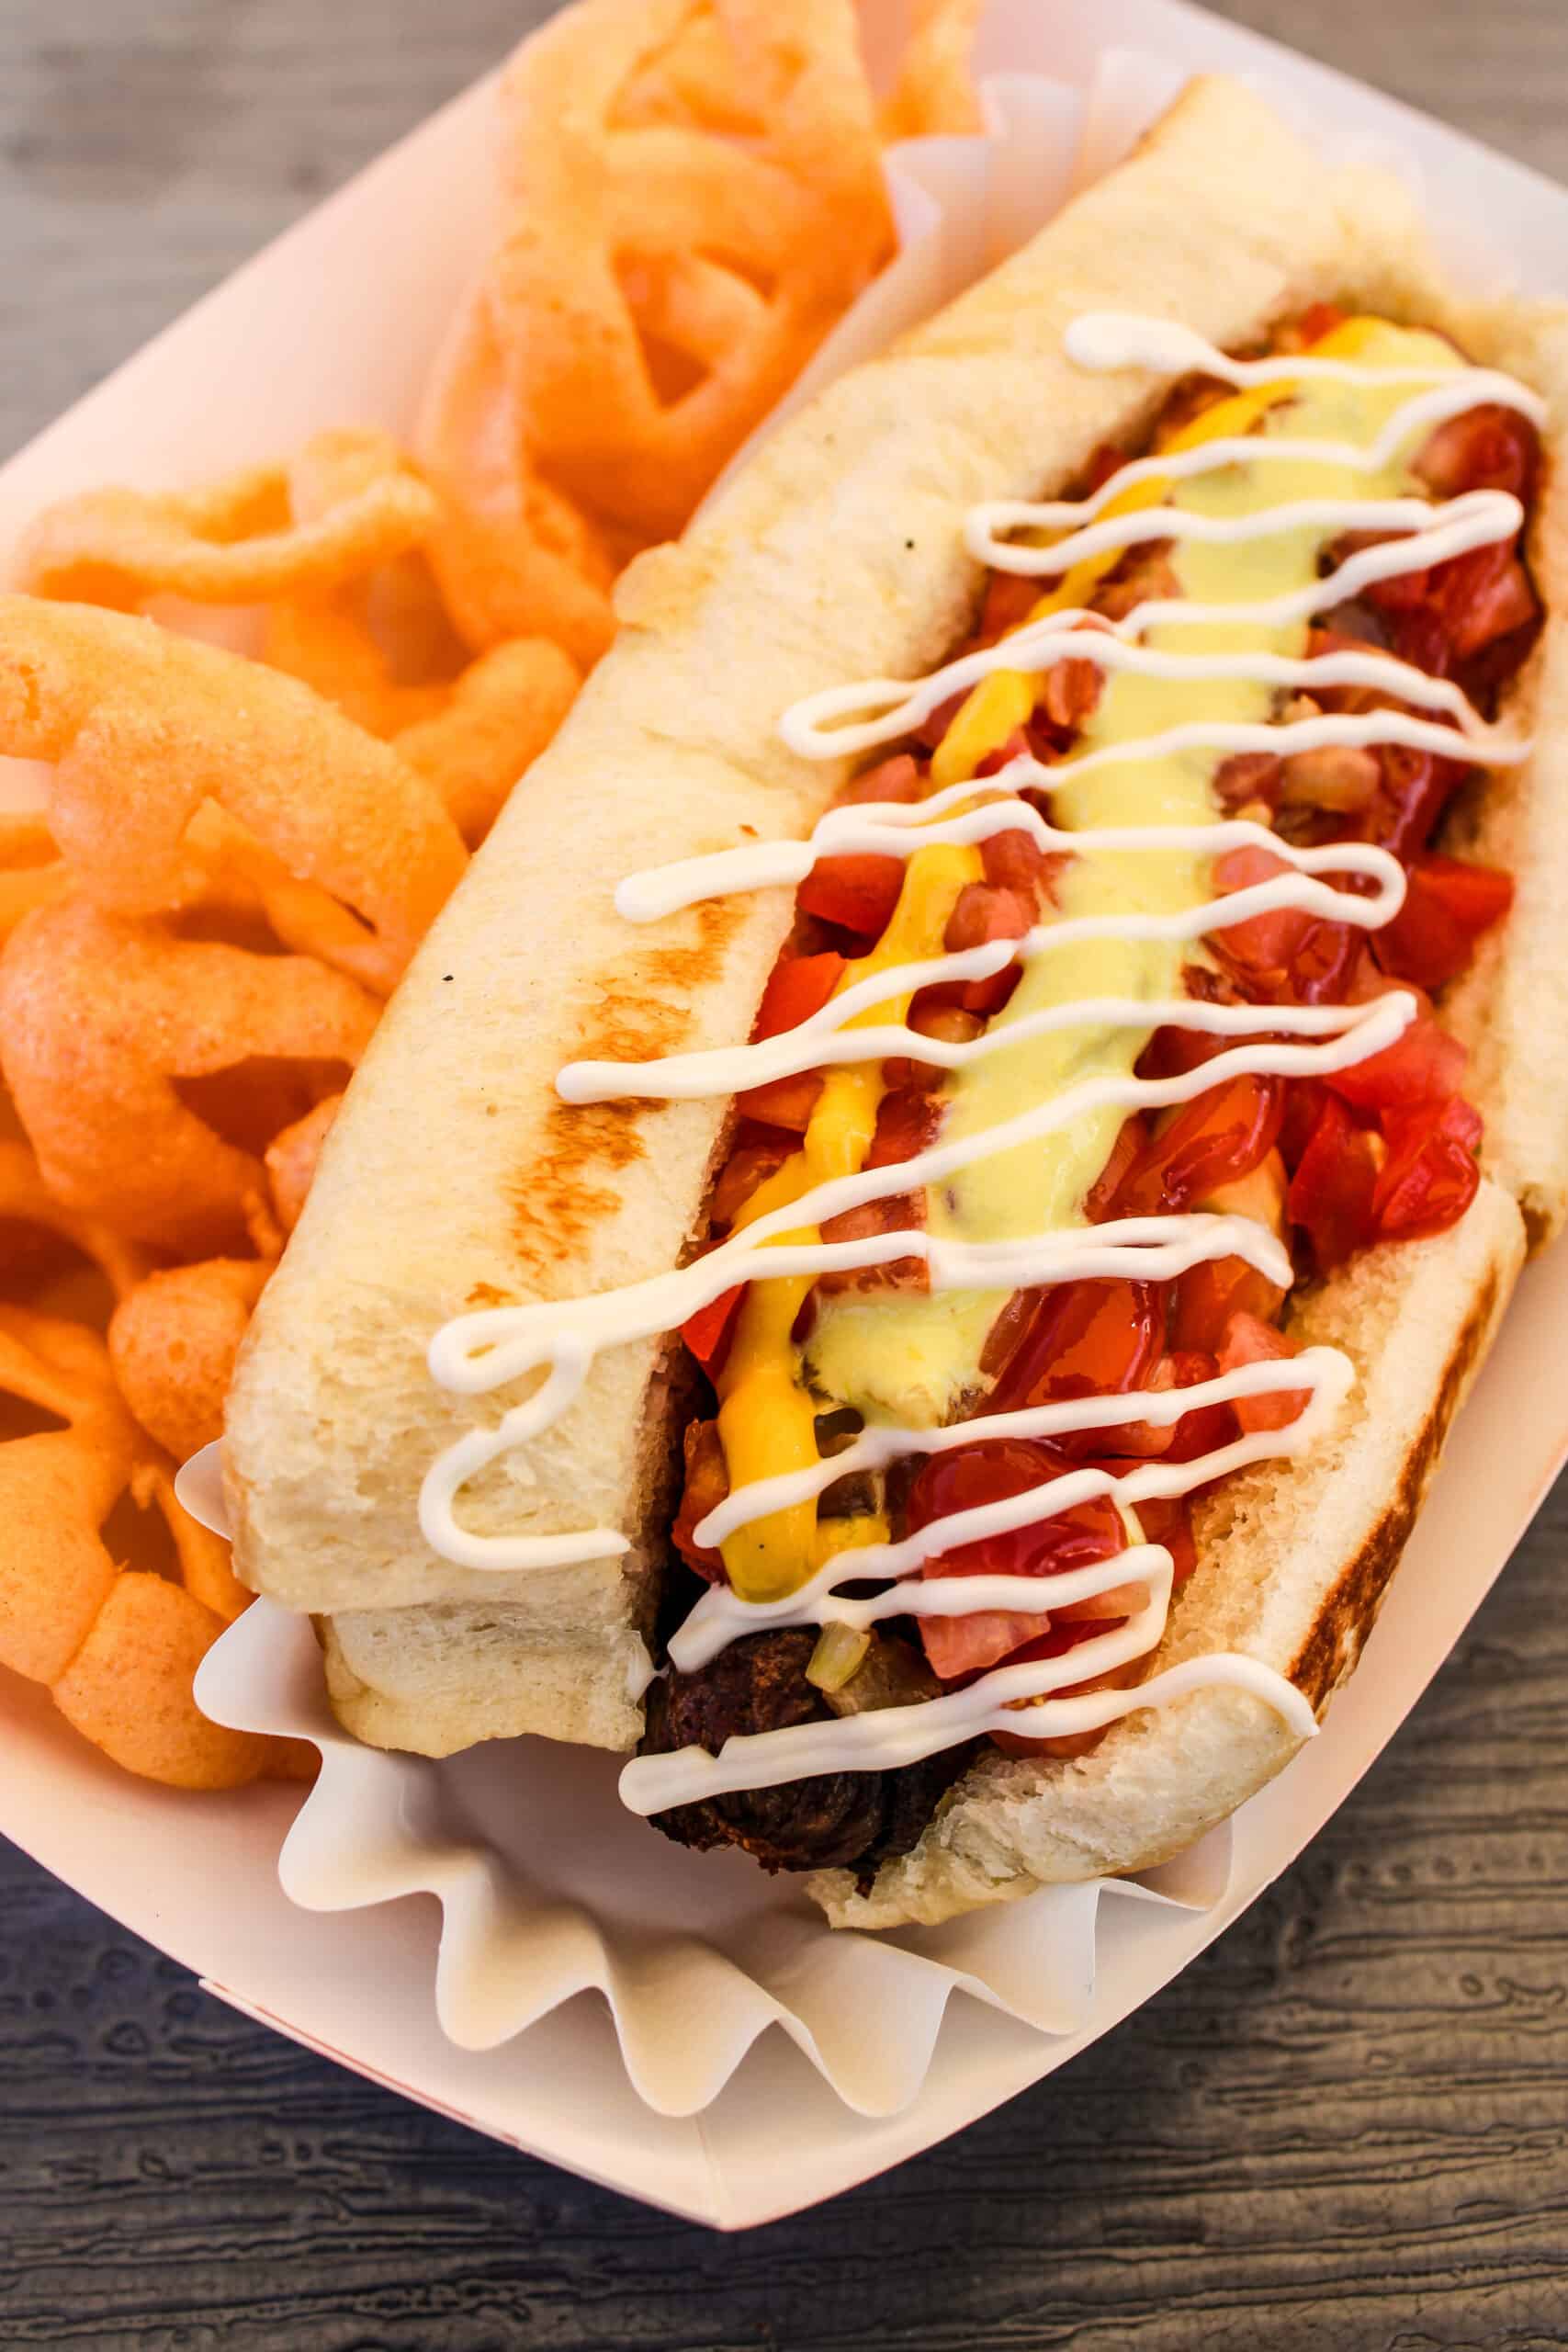 Sonoran dog- a bacon-wrapped hot dog, topped with jalapeno sauce, mayo, ketchup, mustard, grilled onions, tomatoes, pinto beans, and cheese by Nana Sonoran